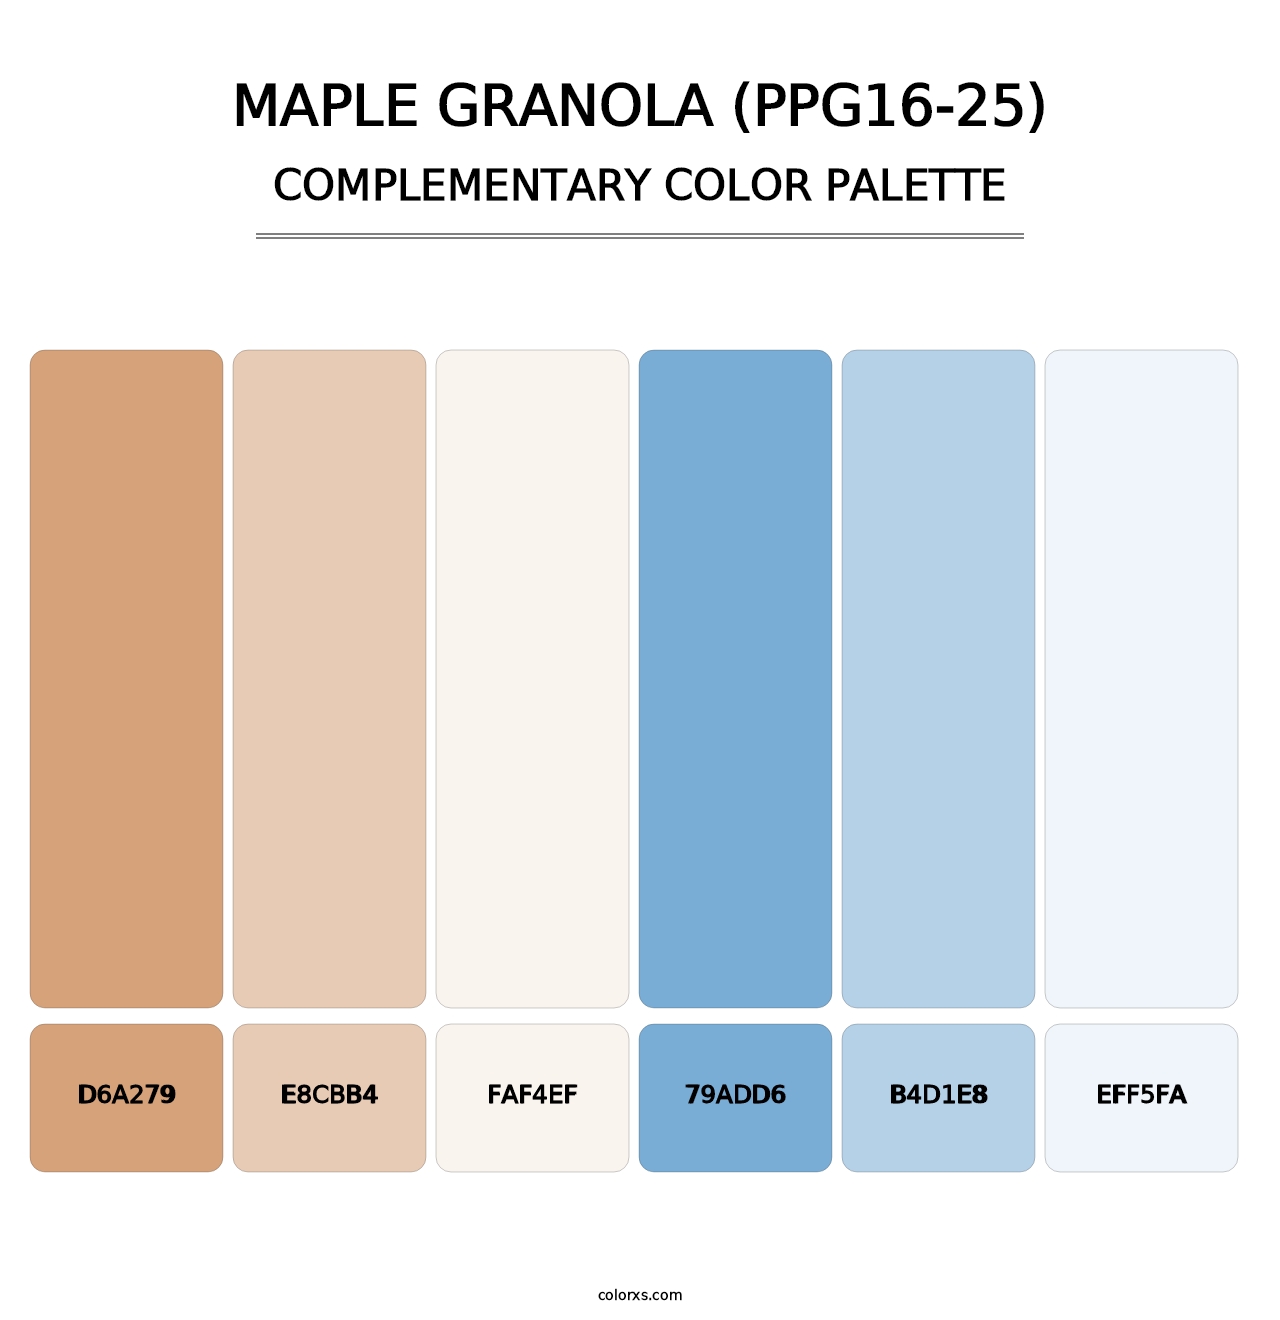 Maple Granola (PPG16-25) - Complementary Color Palette